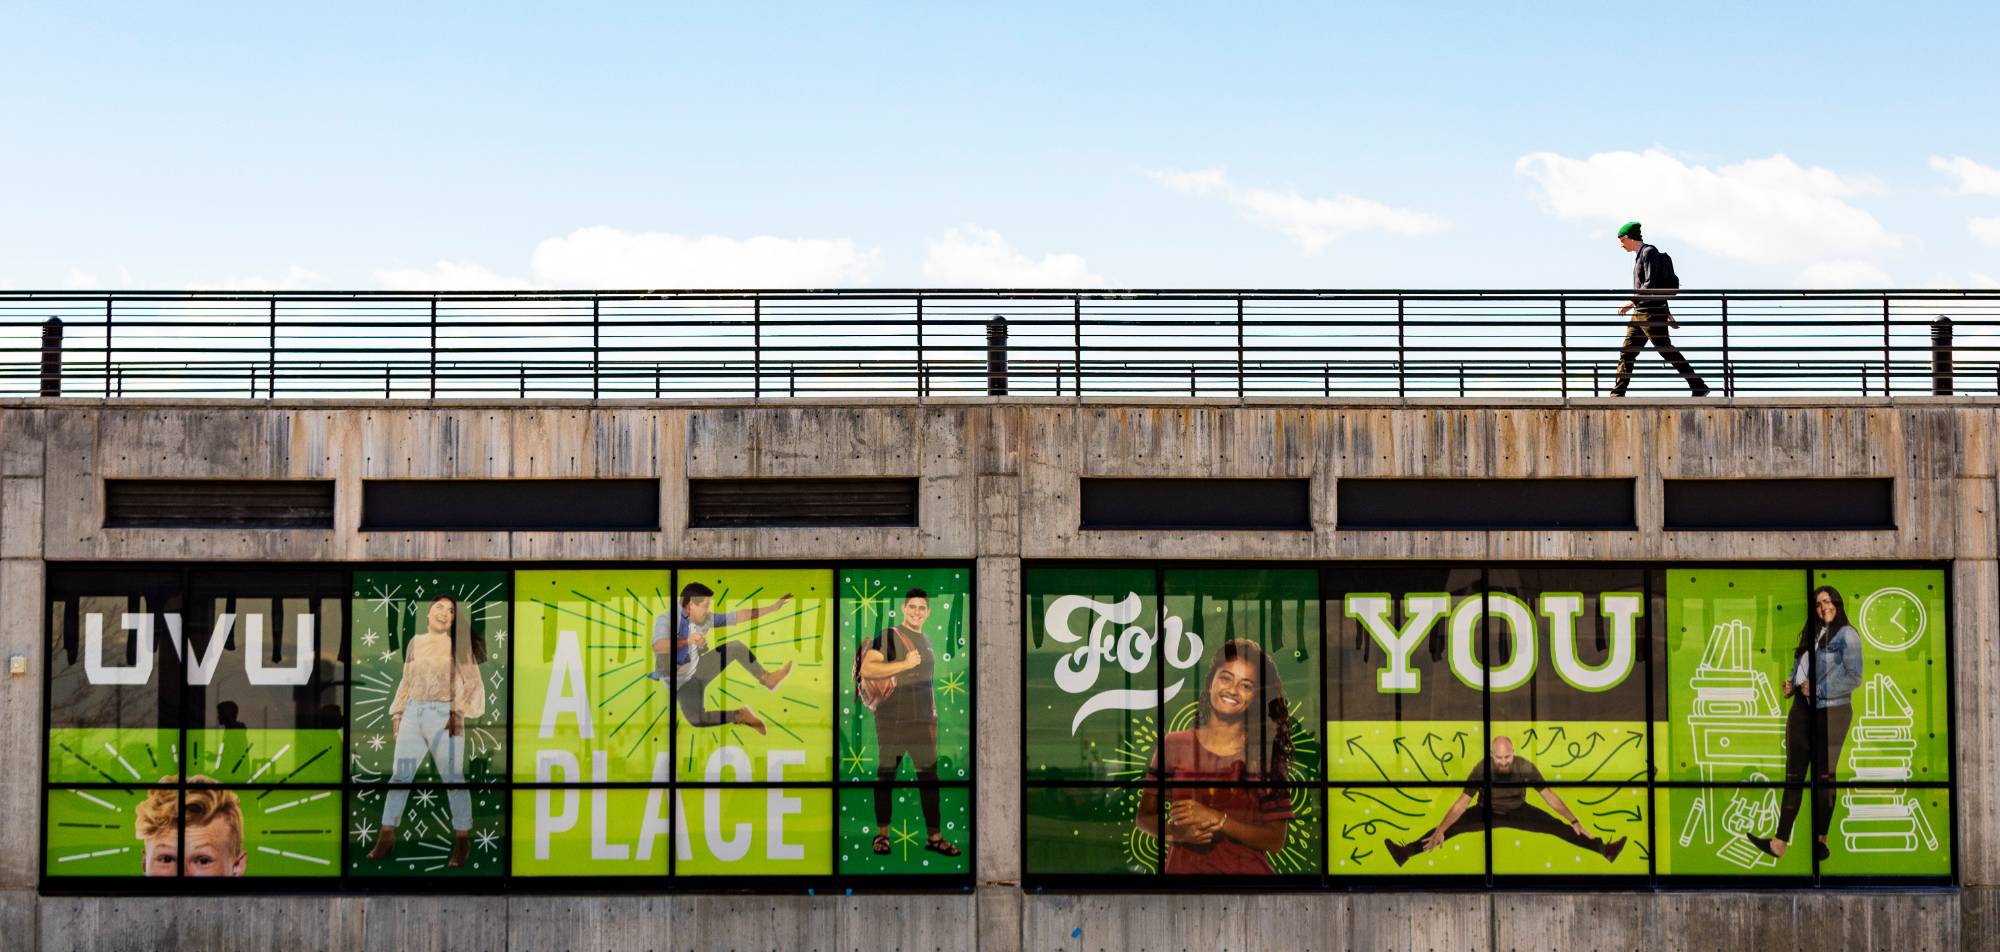 UVU A Place For You on the pedestrian bridge